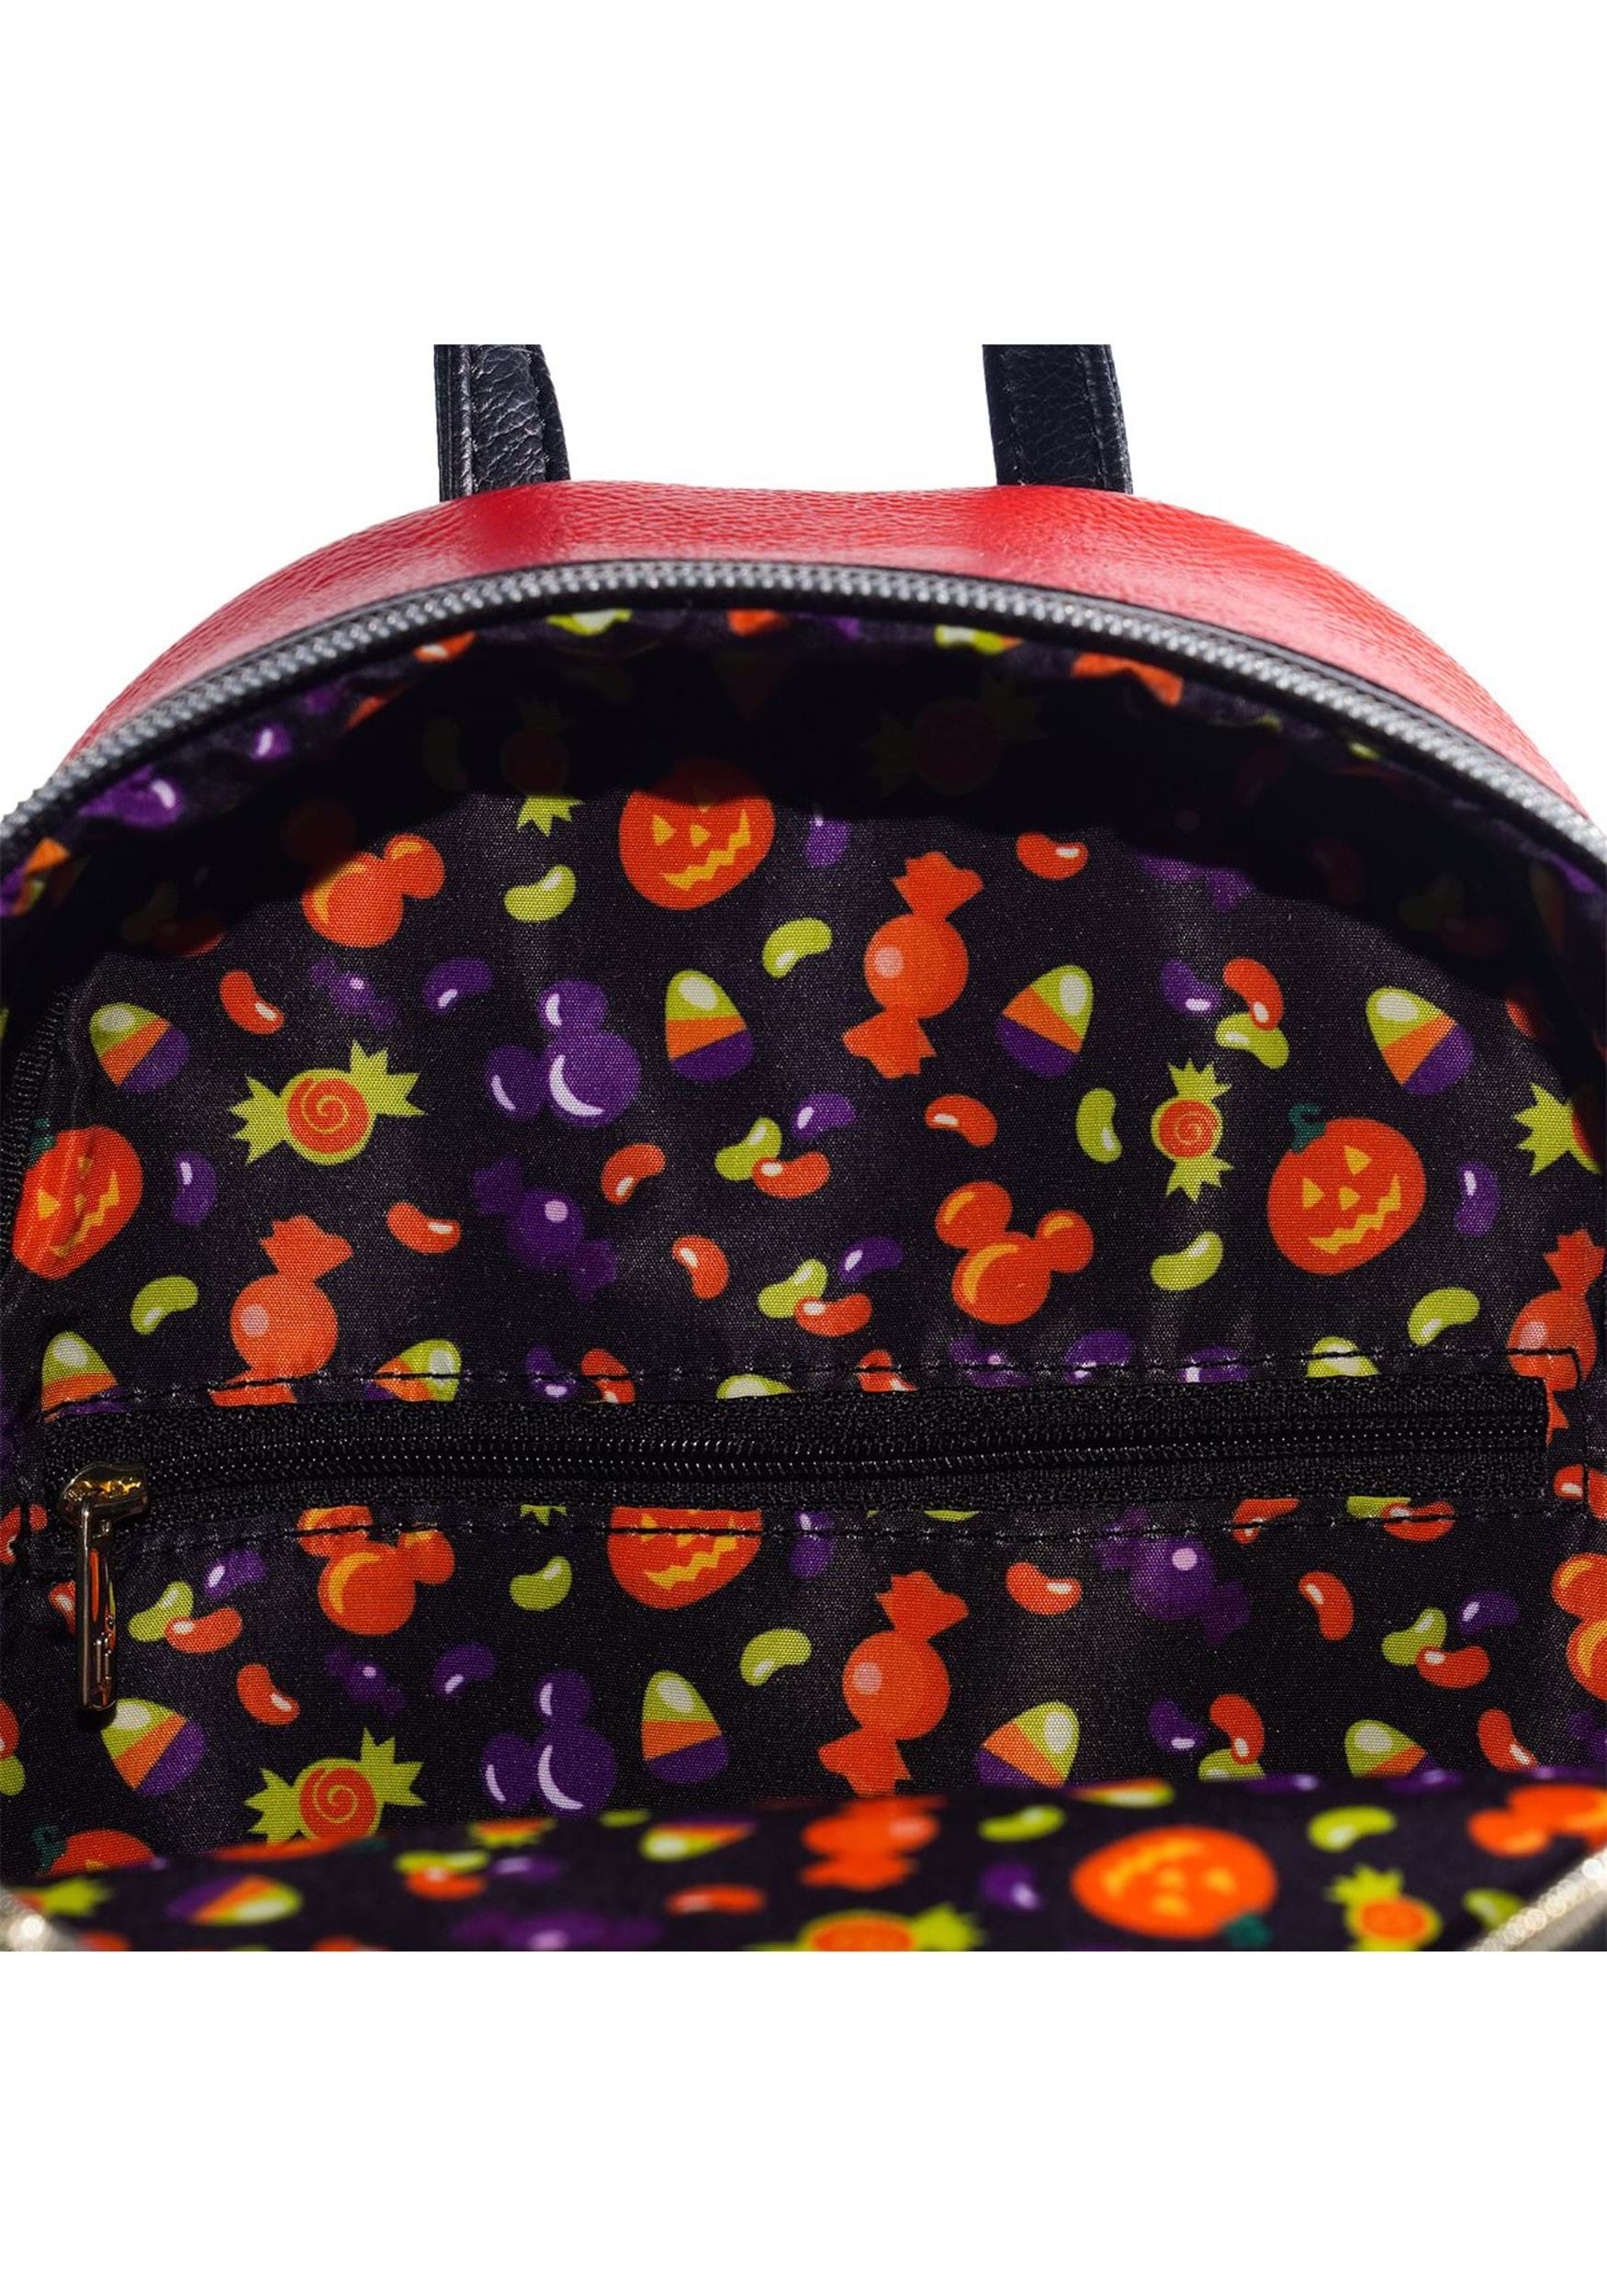 Loungefly Mickey Mouse Devil Mini Backpack